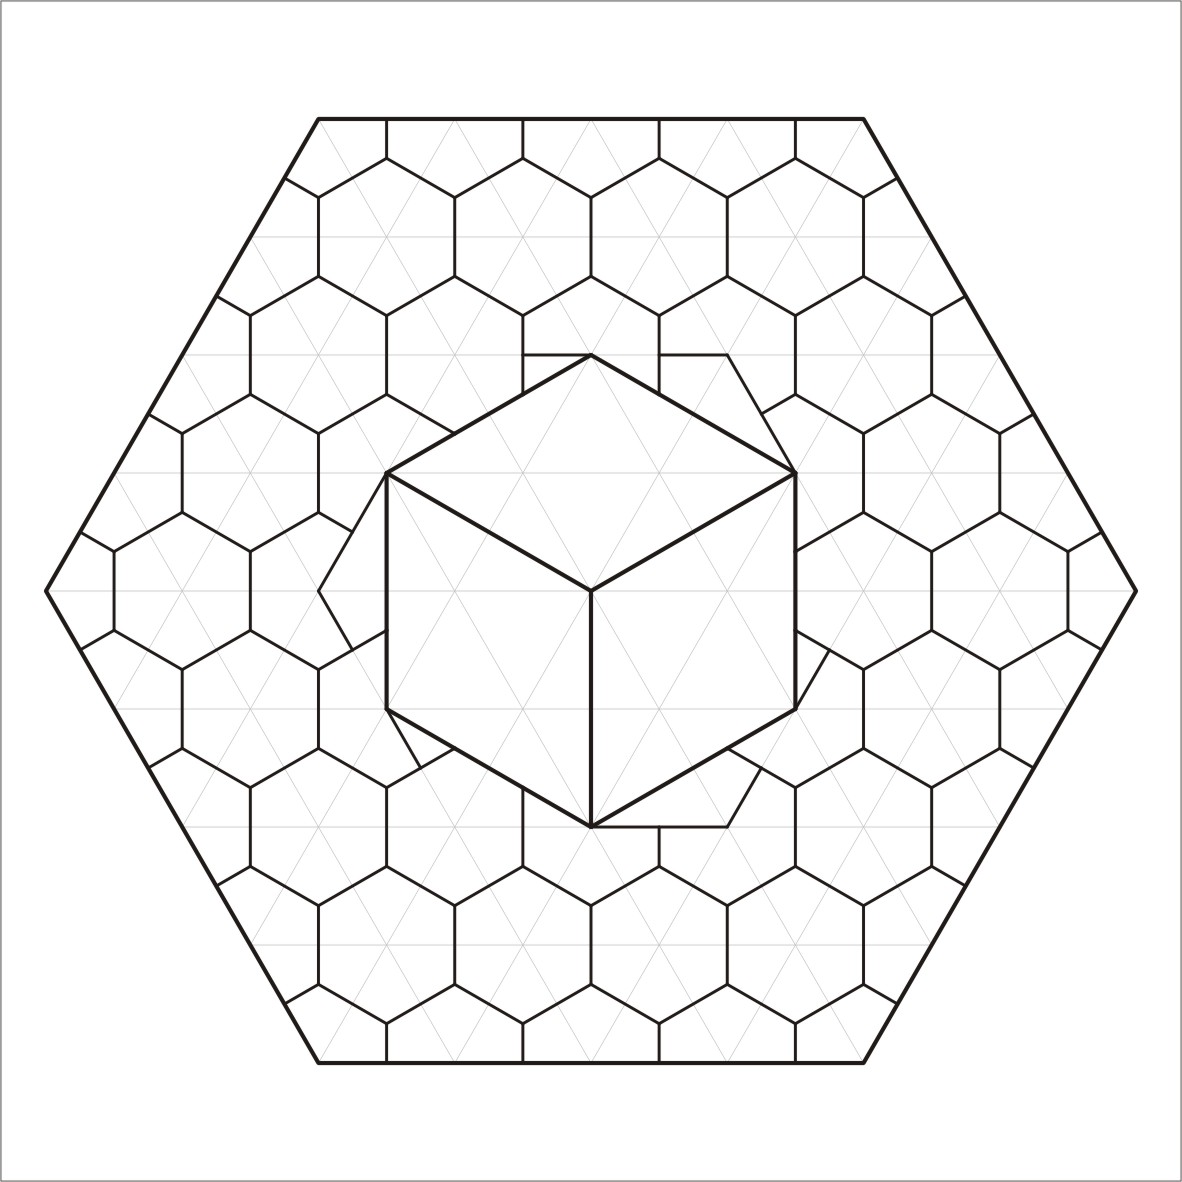 1-Cube Exercise